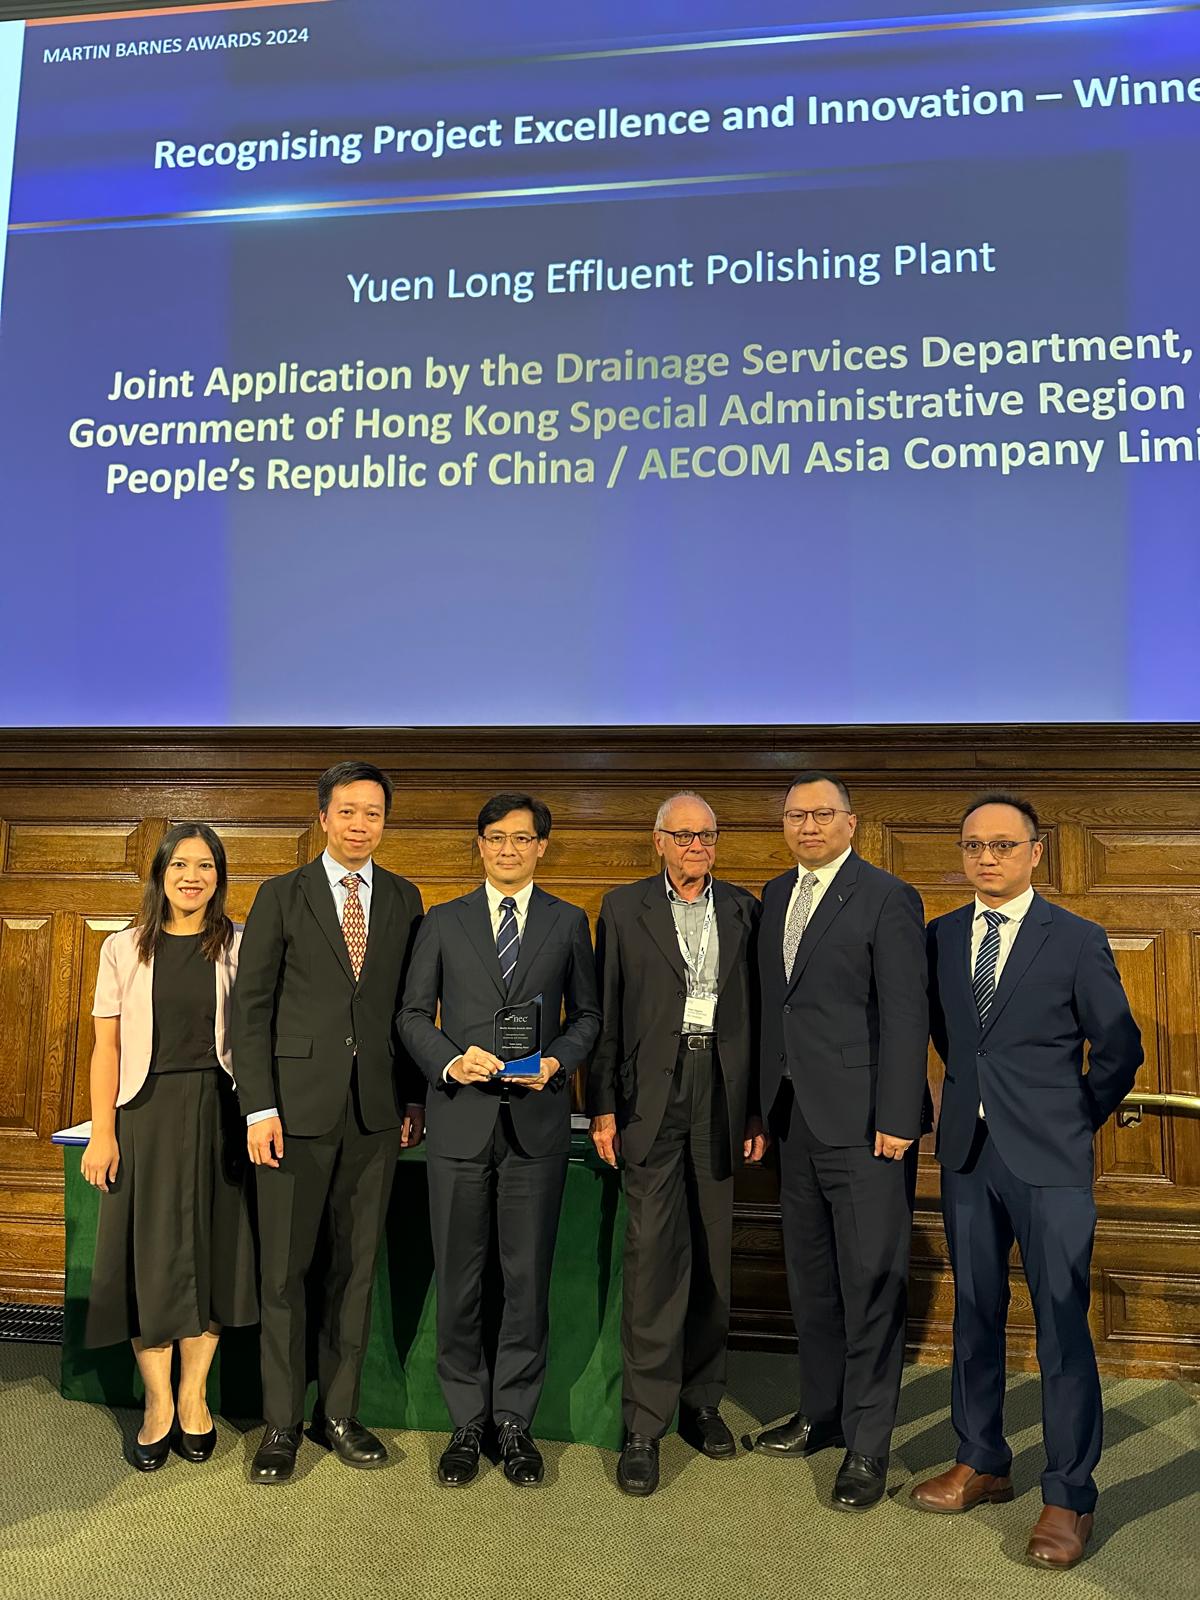 The Director of Drainage Services, Mr Ringo MOK Wing-cheong (third left), the Chief Engineer/Sewerage Projects, Mr YIP Tat-ming (second left) and the project team of Yuen Long Effluent Polishing Plant received the Martin Barnes Awards 2024 at the NEC Annual Conference 2024 and Prize Presentation Ceremony in London, the United Kingdom on 21 June 2024